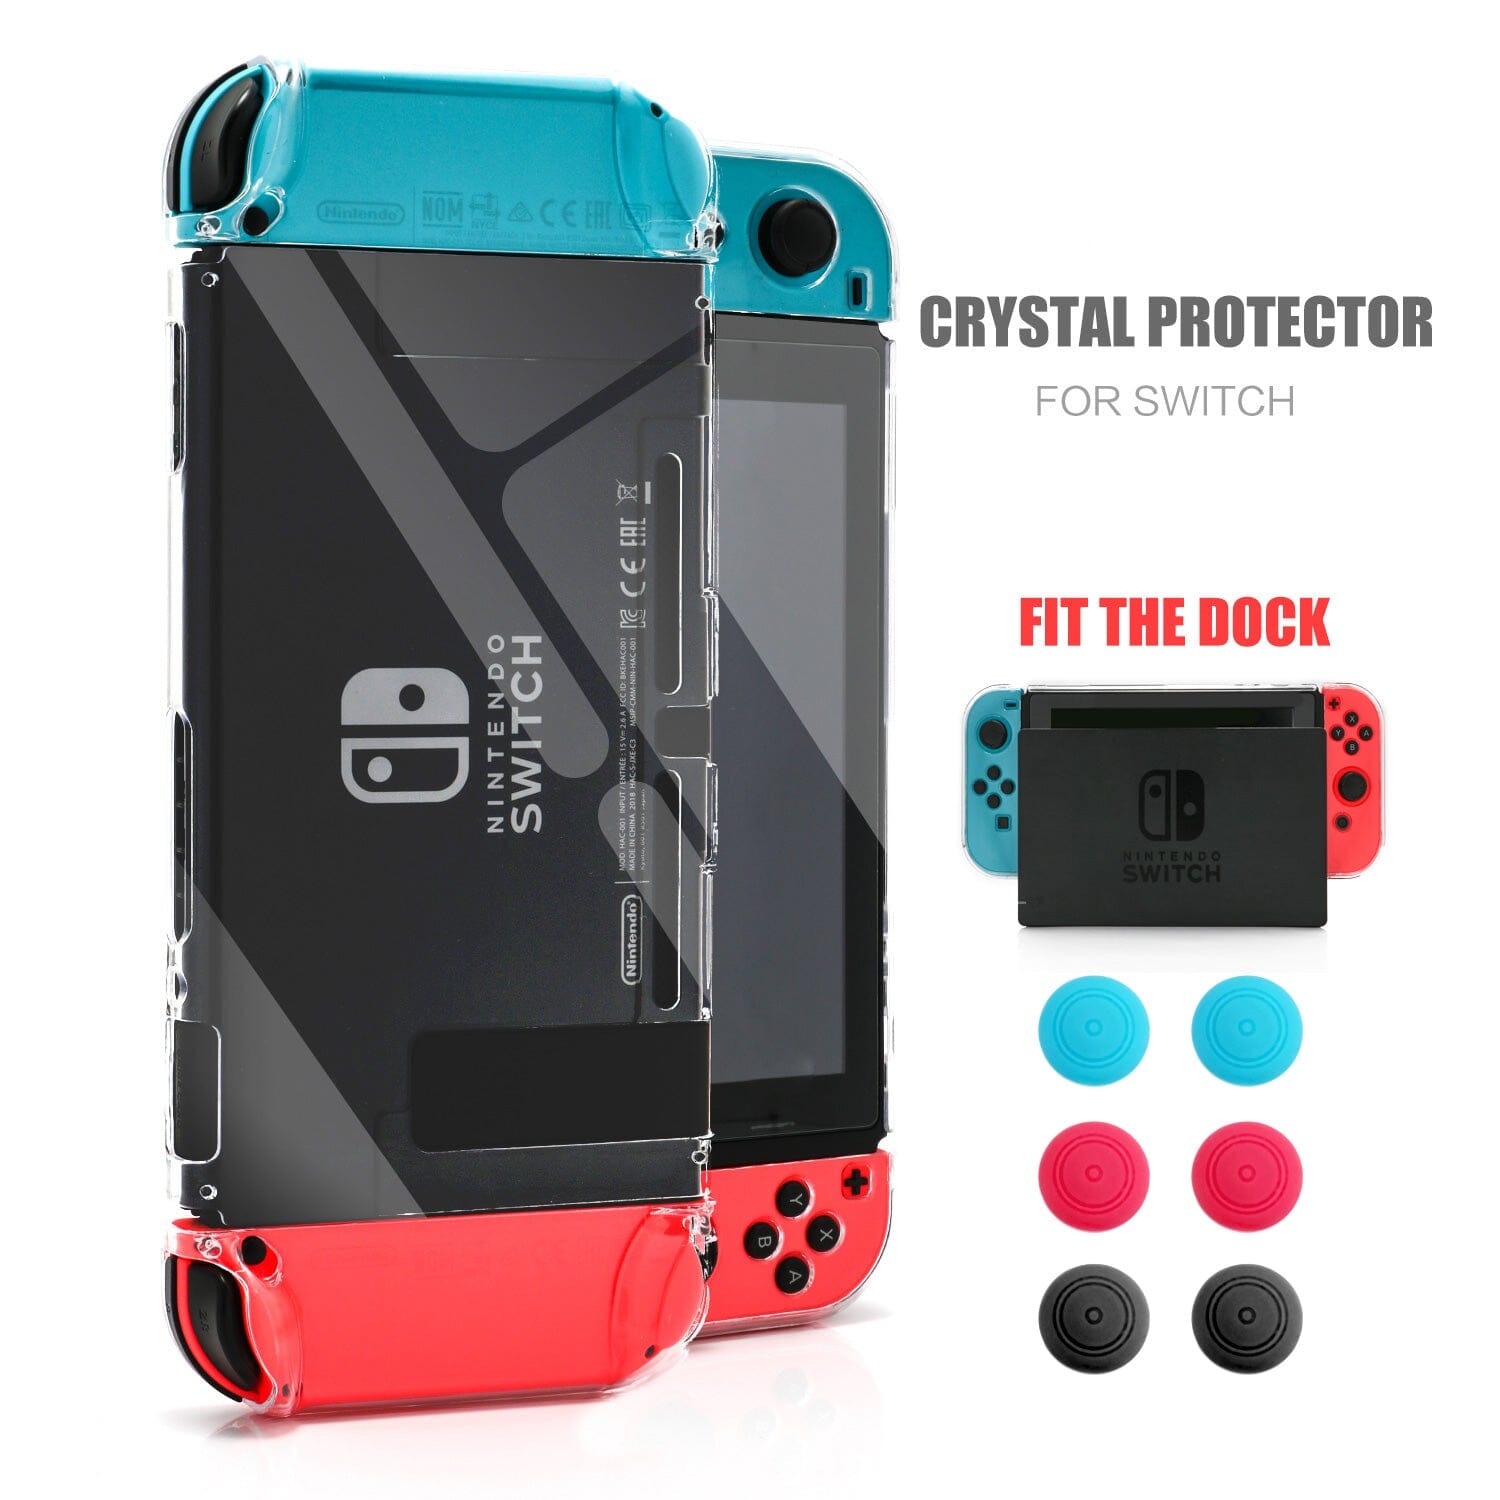 Dockable Case for Nintendo Switch, Protective Case for Nintendo